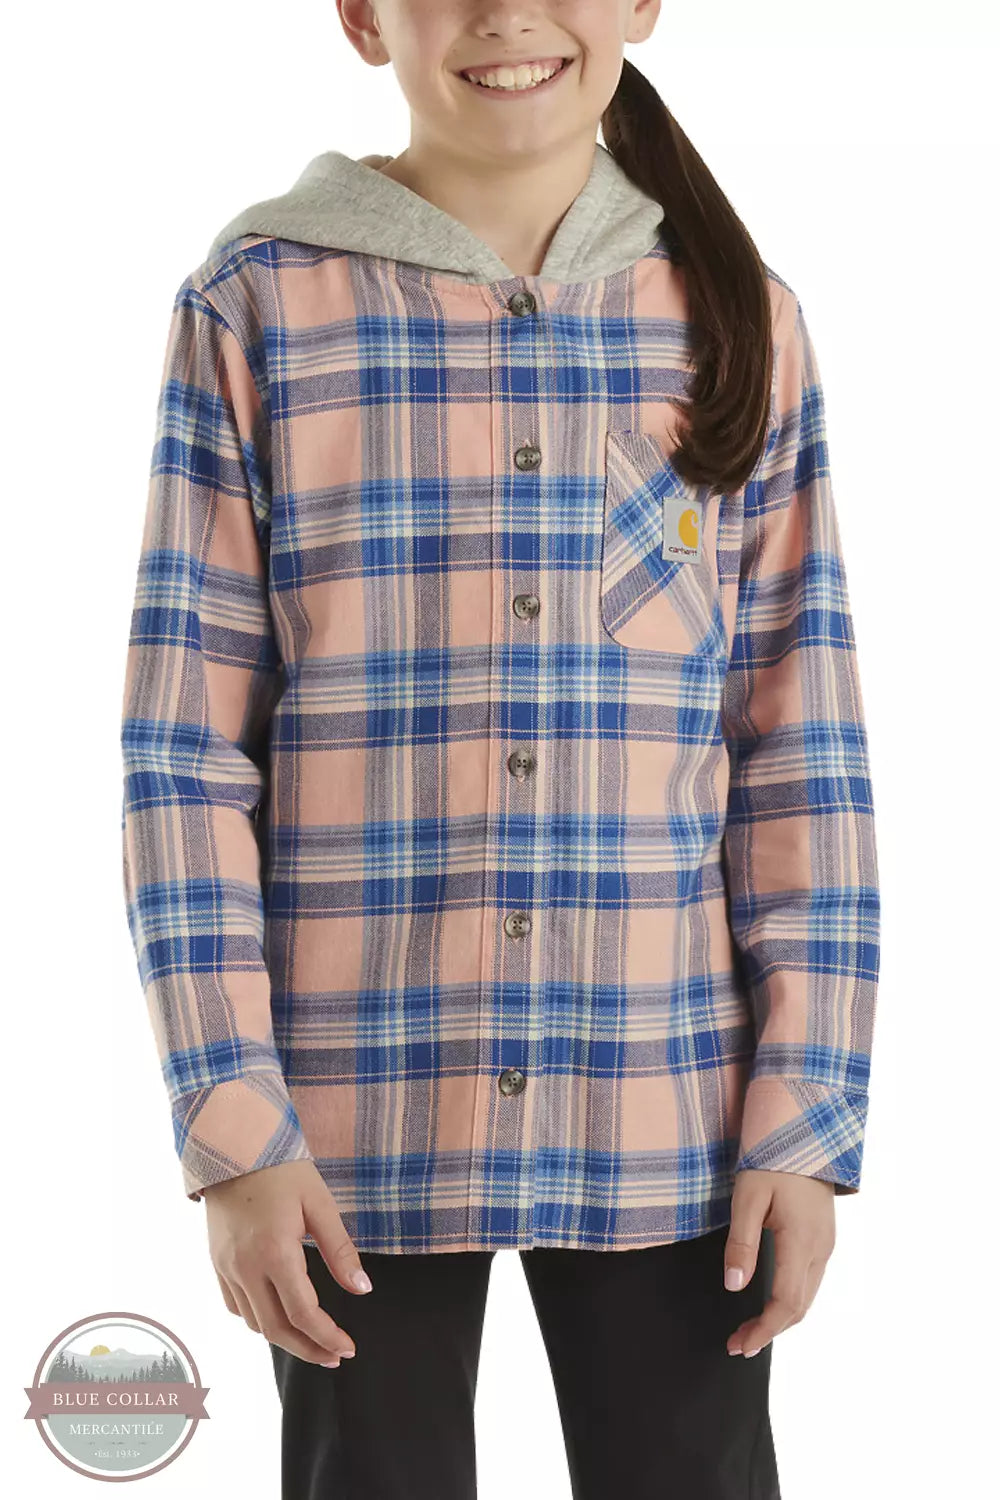 Carhartt CE9149-P399 Long Sleeve Flannel Button Front Hooded Shirt in Peach Amber Front View